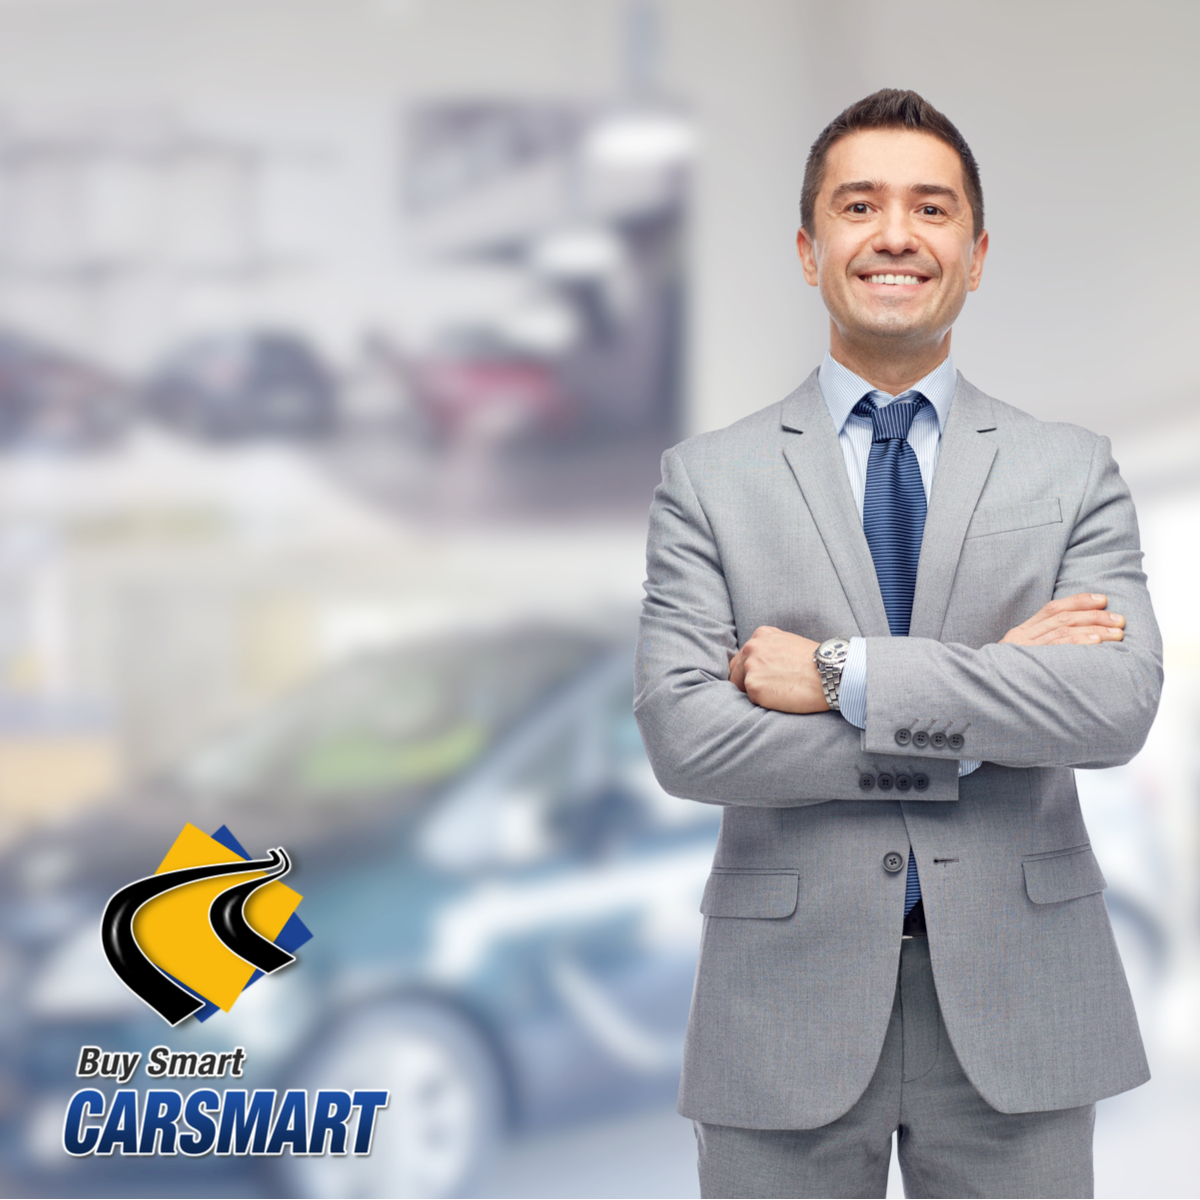 Check Out CarSmart’s Selection of Low Mileage Cars for Great Prices in Fort Hunt!